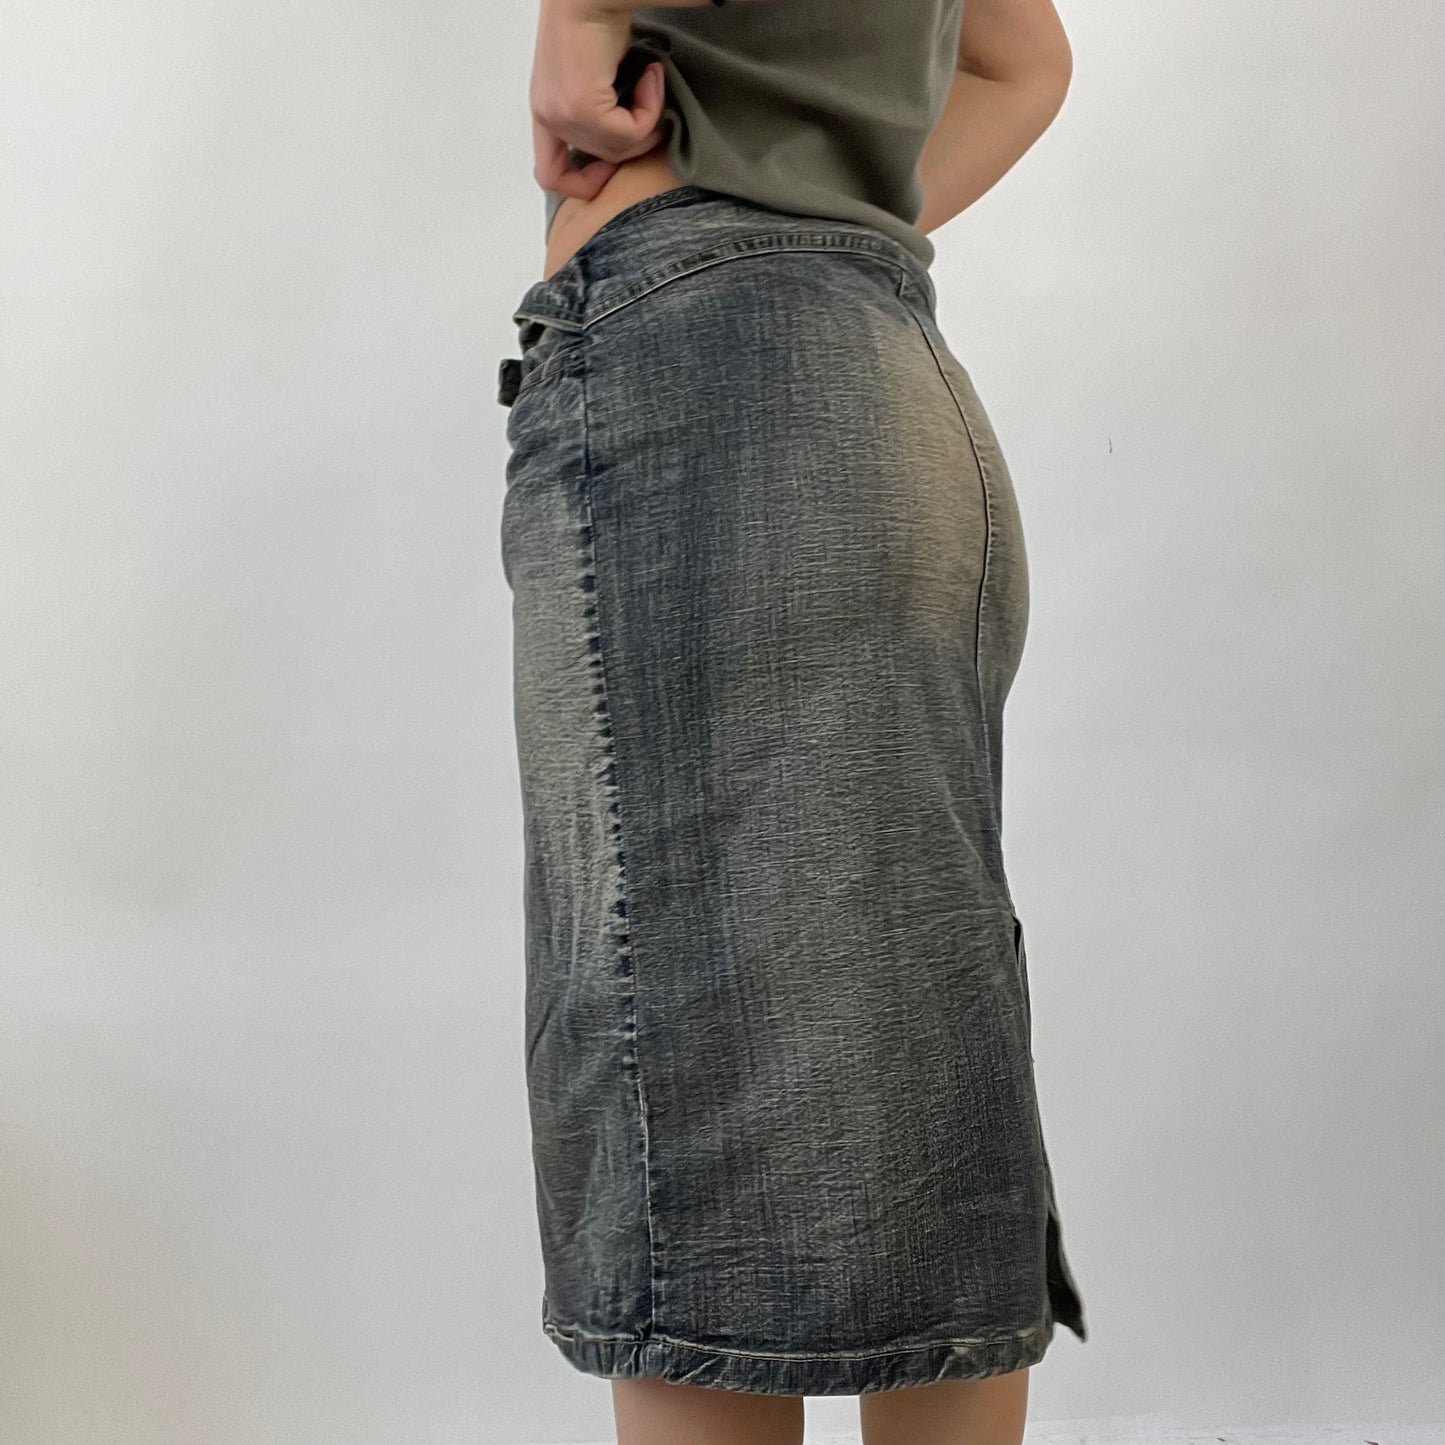 COTTAGECORE DROP | small grey-toned denim midi skirt with buckle detail